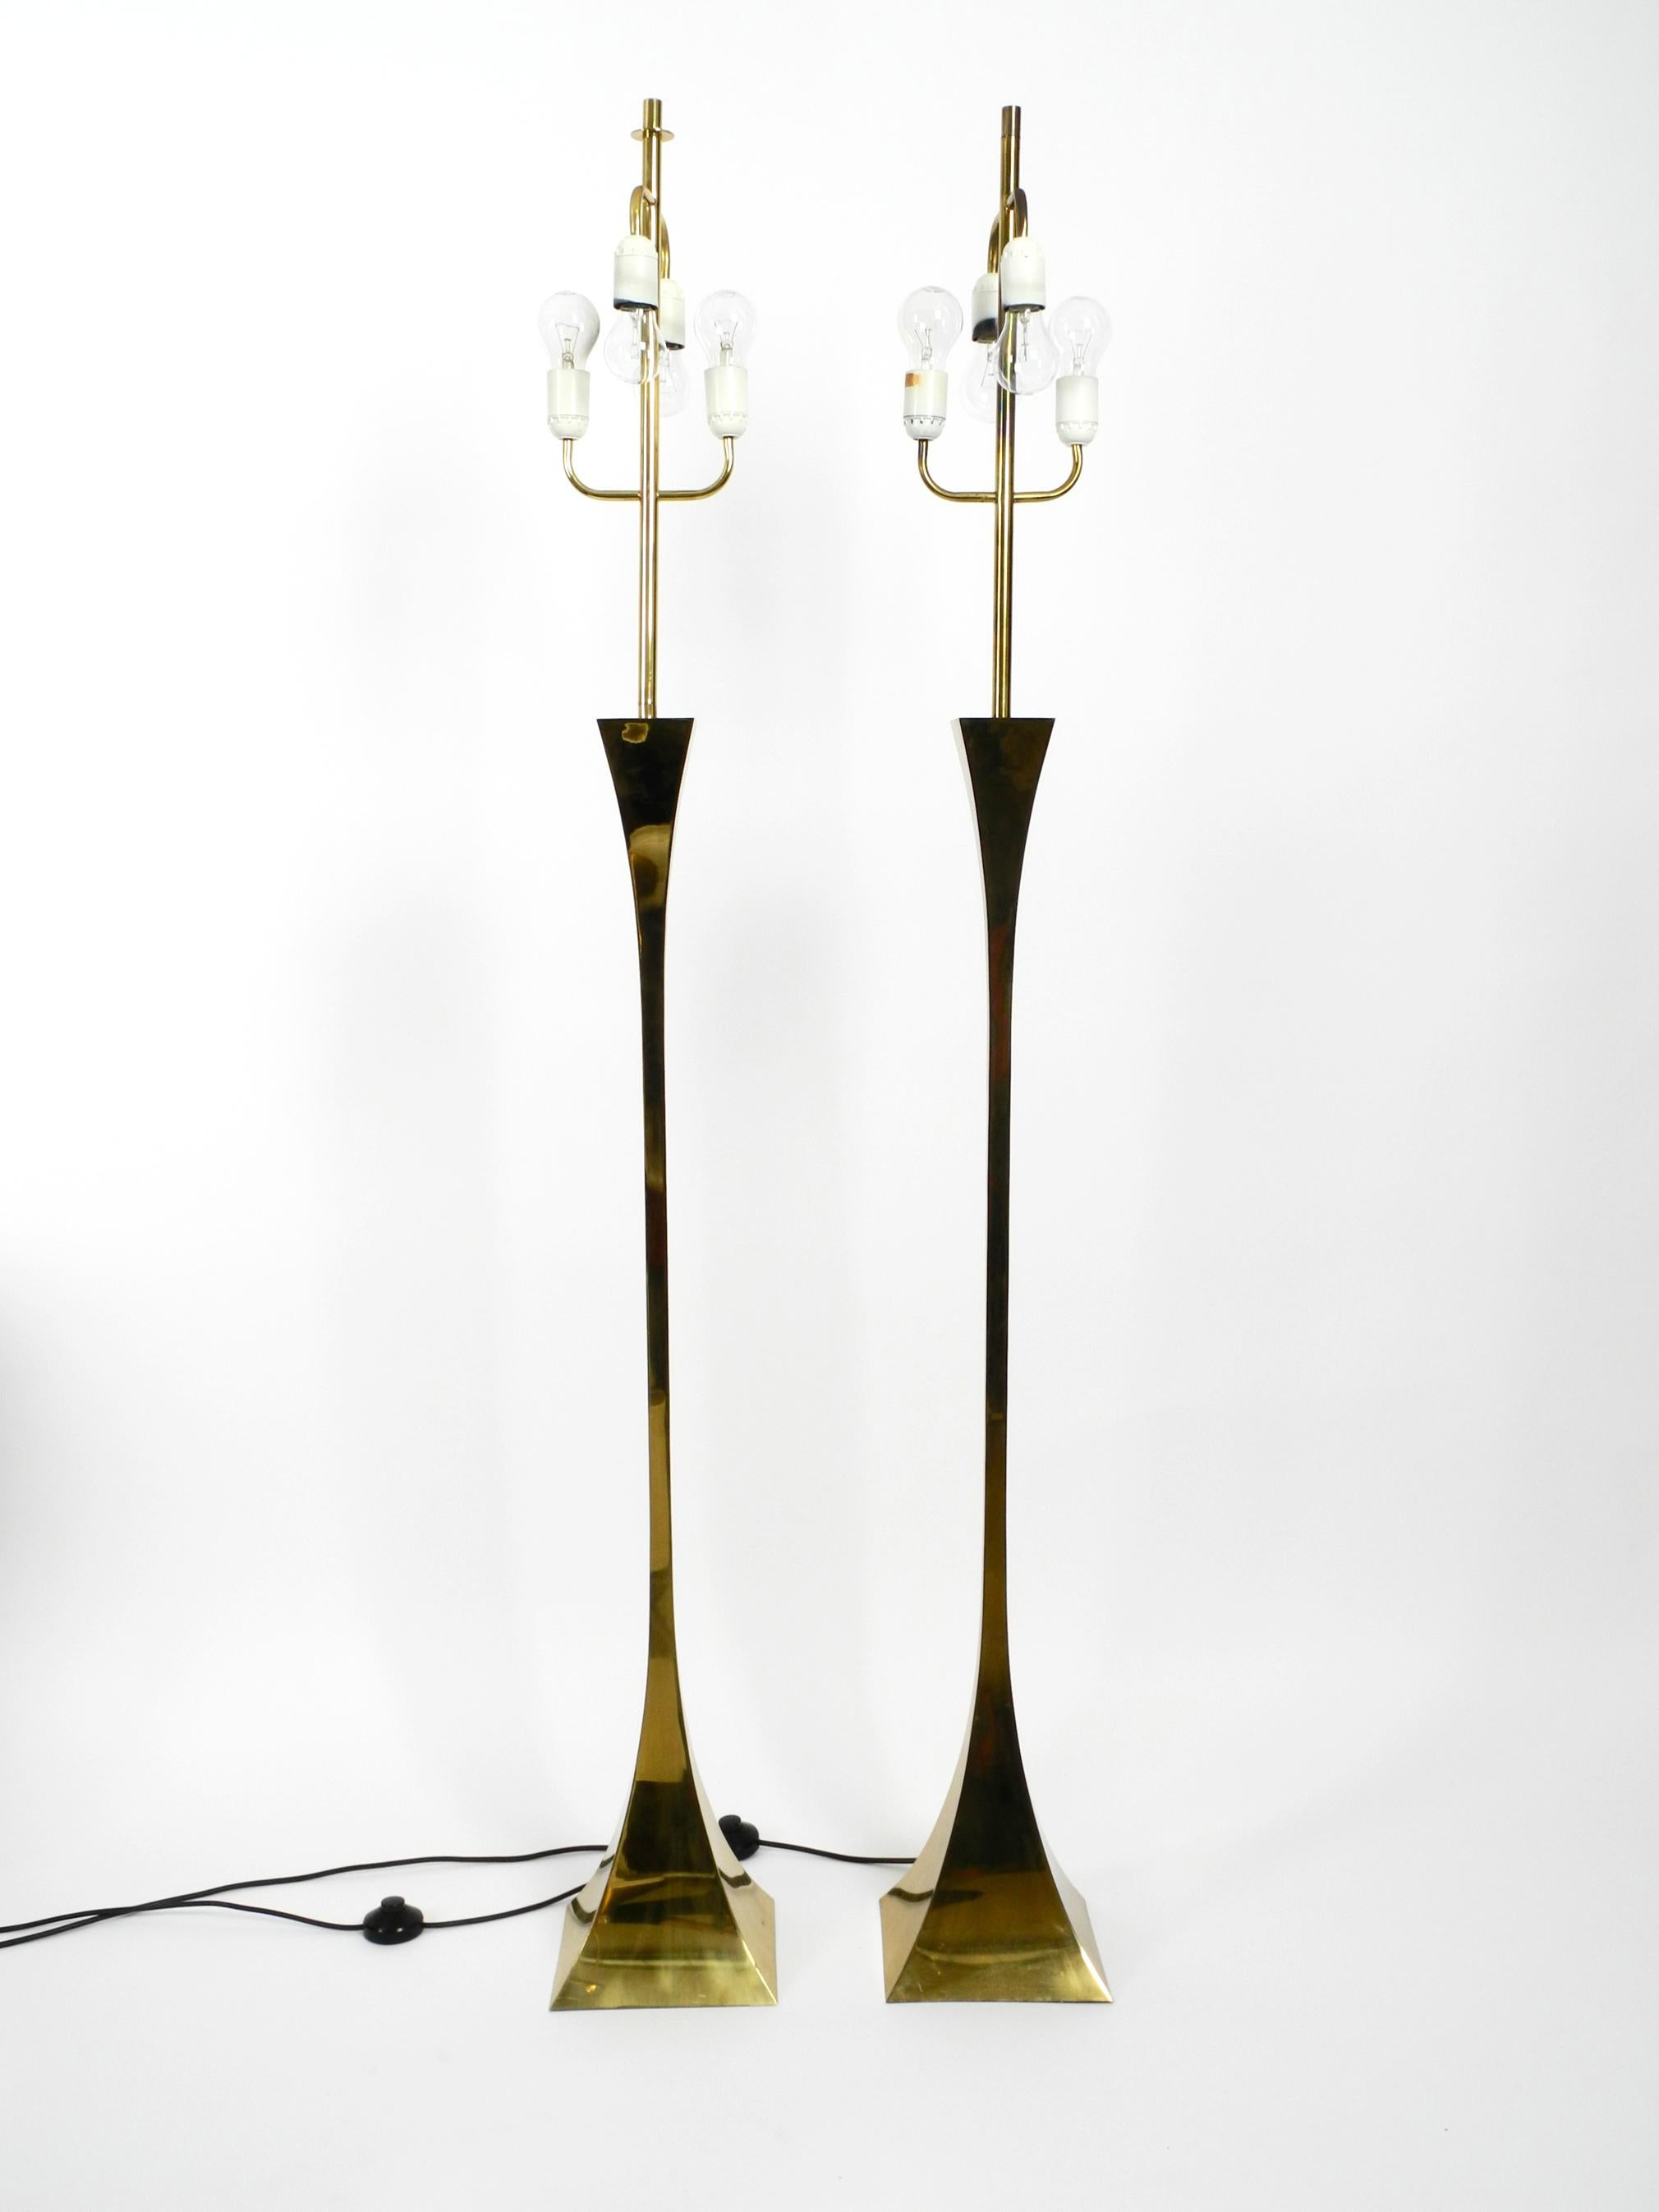 Beautiful rare pair of 1970's brass floor lamps.
Designed by Tonello and Montagna Grillo for High Society.
Made in Italy. Great, very elegant Italian design in its original vintage condition.
Base and rod are made entirely of brass. 
Beautiful